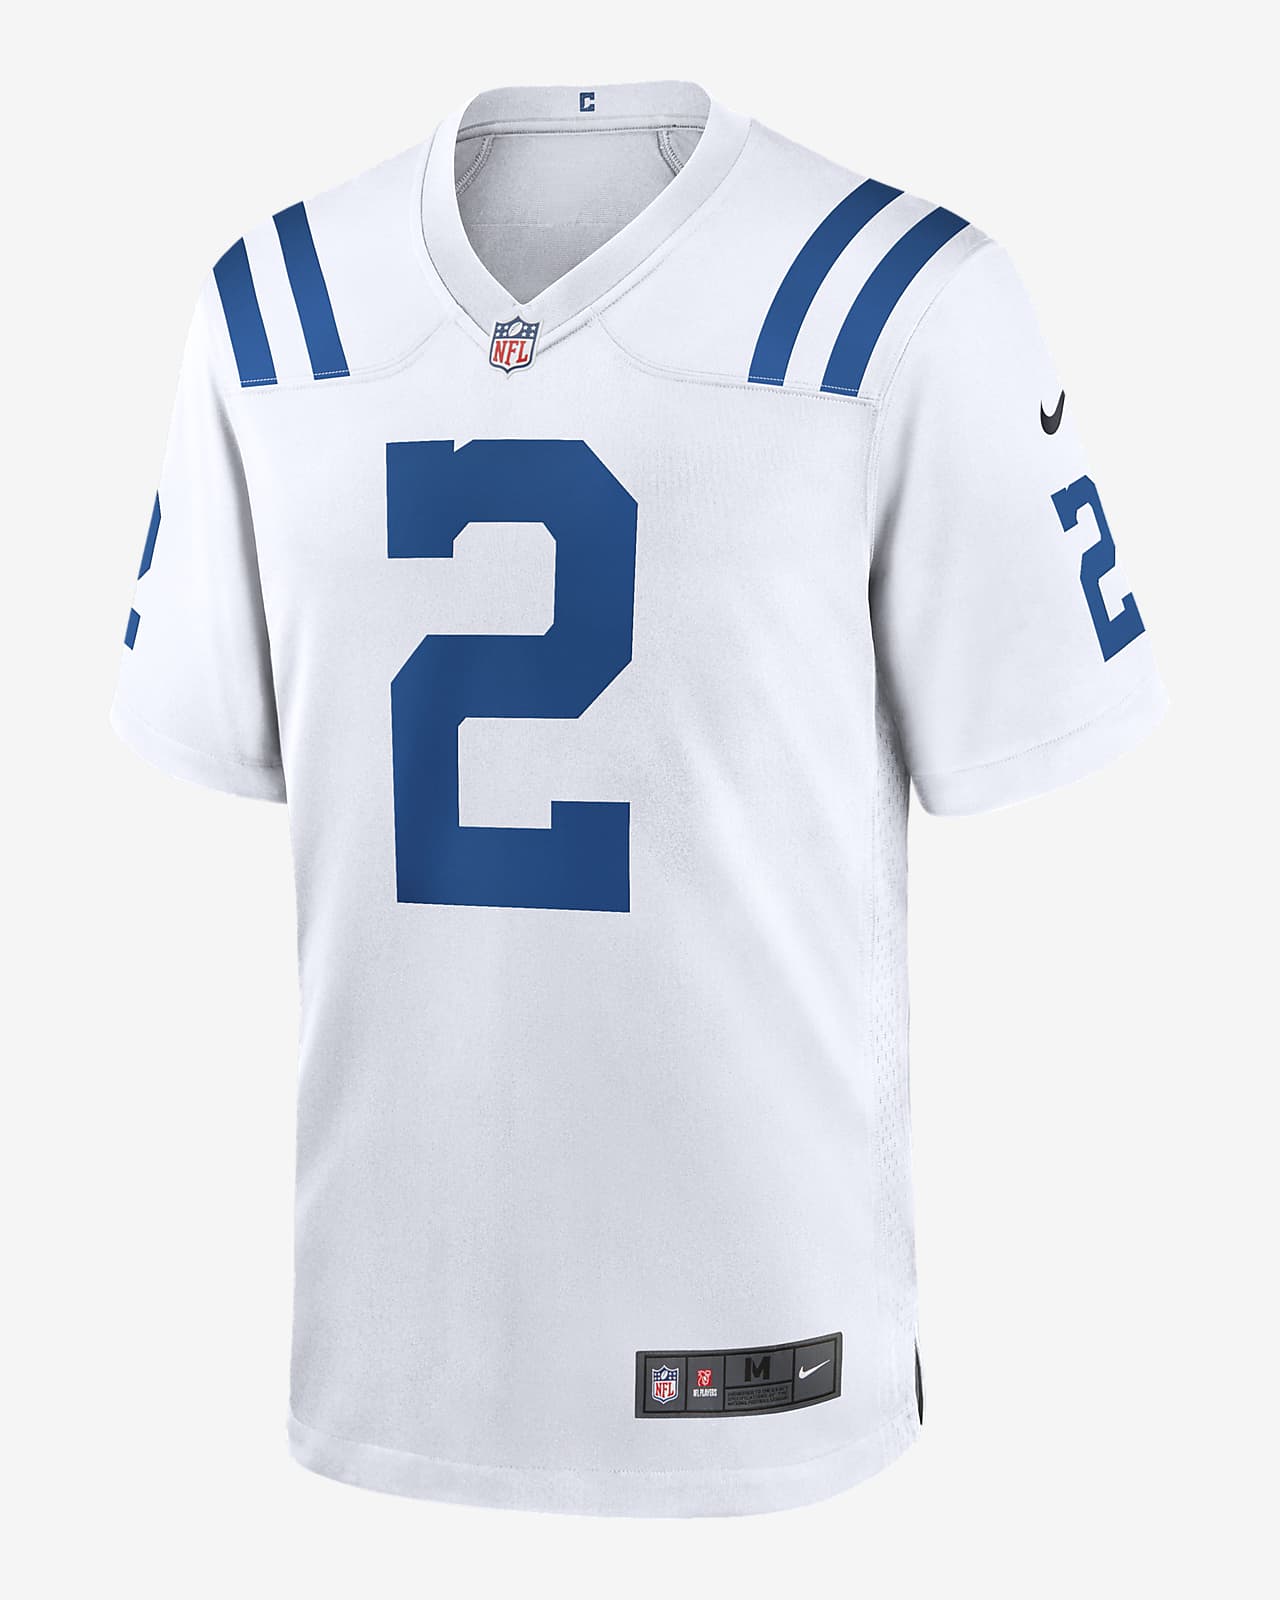 NFL Indianapolis Colts (Carson Wentz) Men's Game Football Jersey.